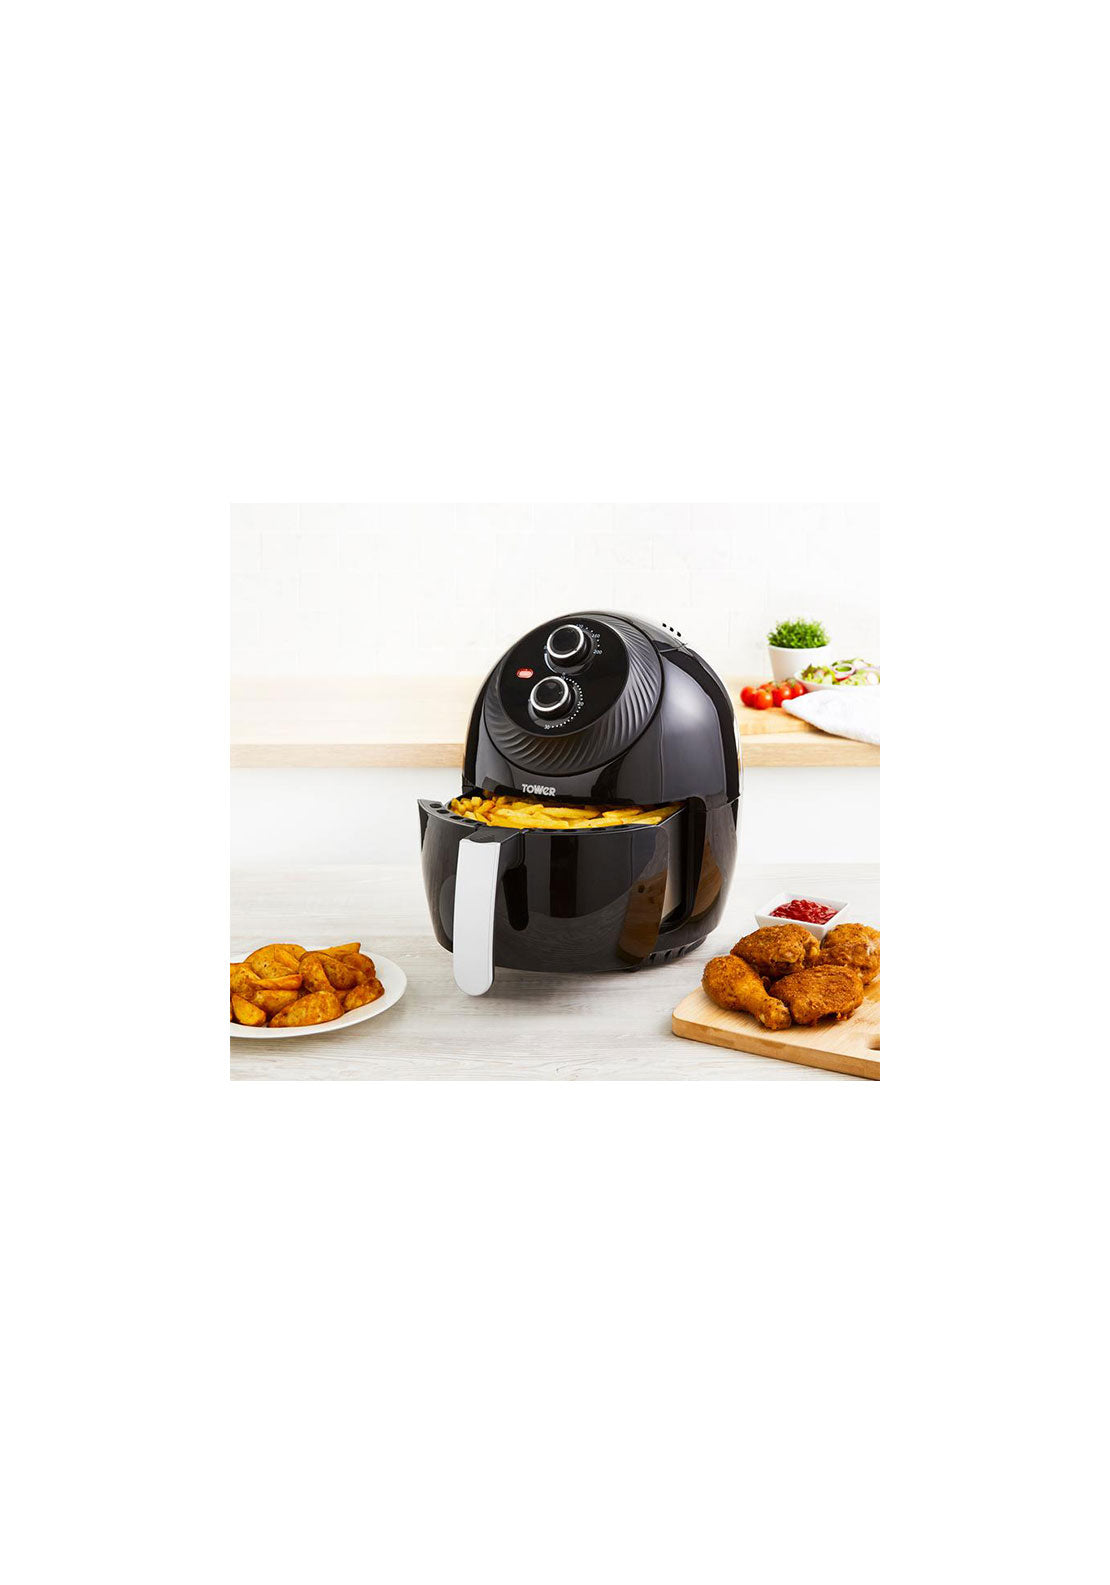 Tower Vortx 4L Manual Air Fryer | T17082 3 Shaws Department Stores